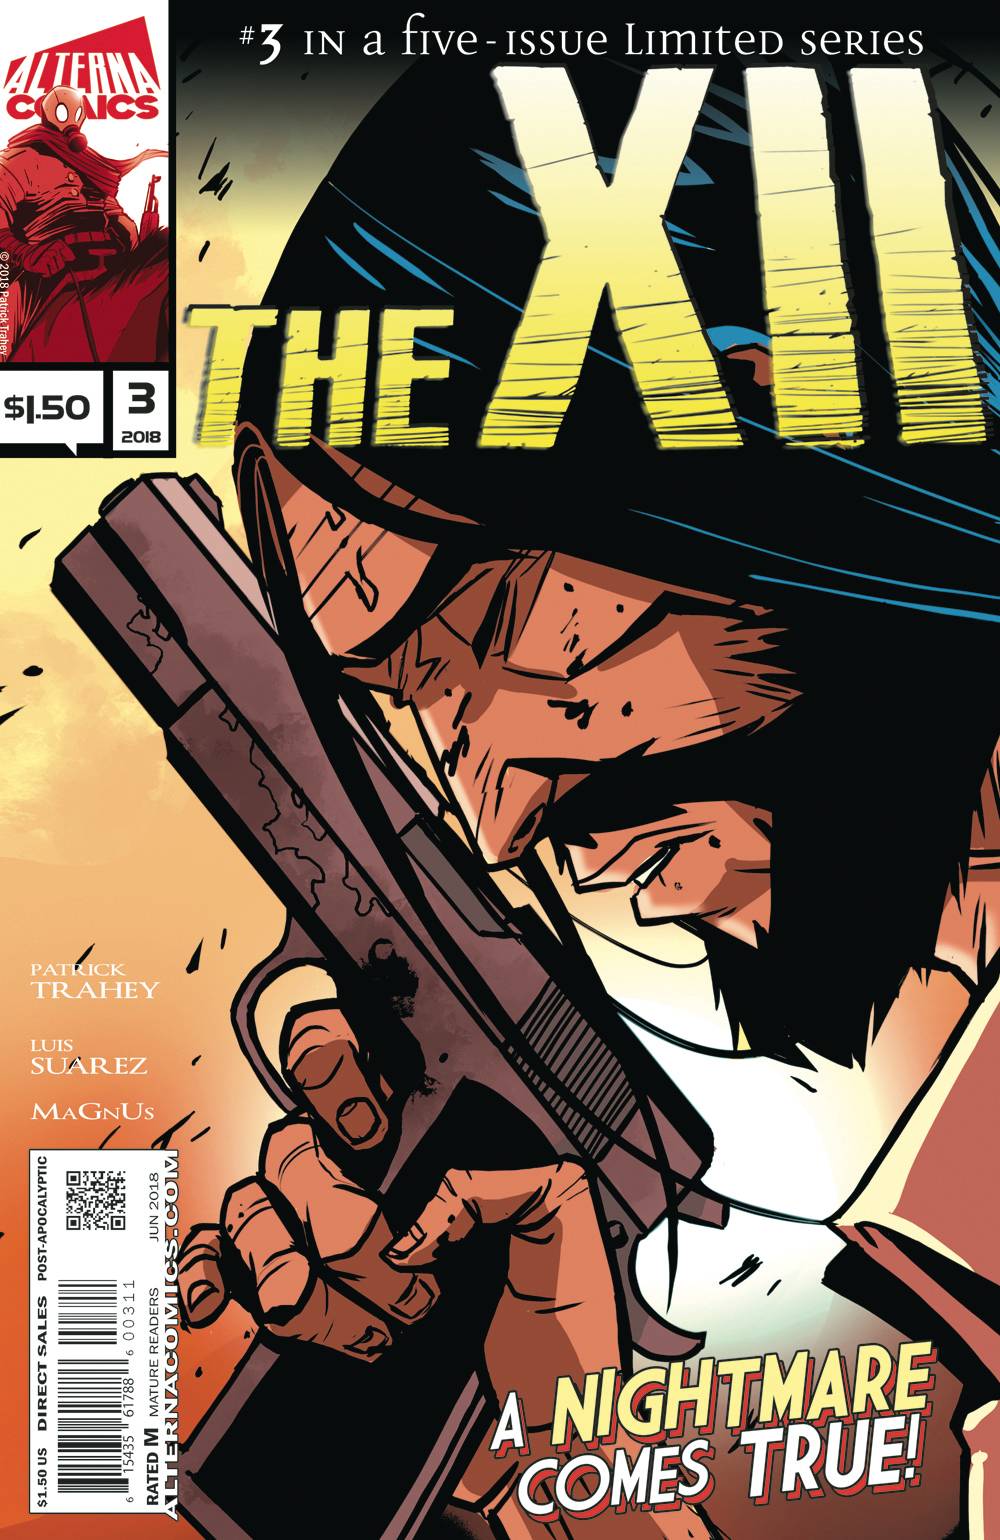 The Xii #3 (Mature) (Of 5)